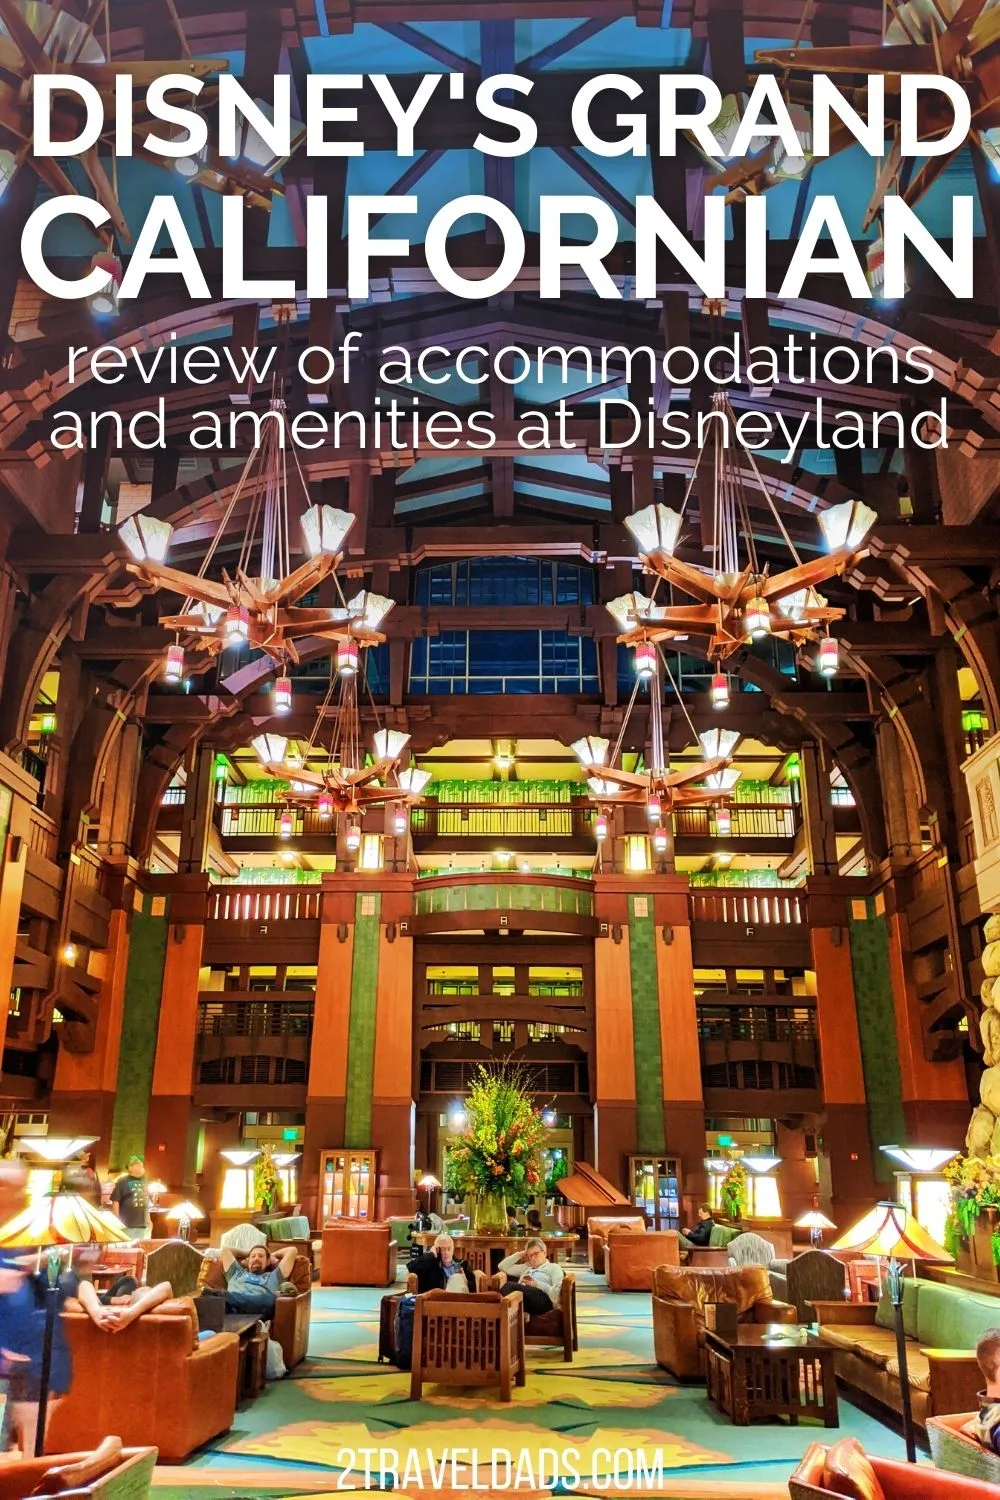 Disney's Grand Californian Hotel is the closest option to Disneyland and California Adventure. This review has all the details of staying at the Grand Californian, amenities and tips for planning the best Disneyland trip.